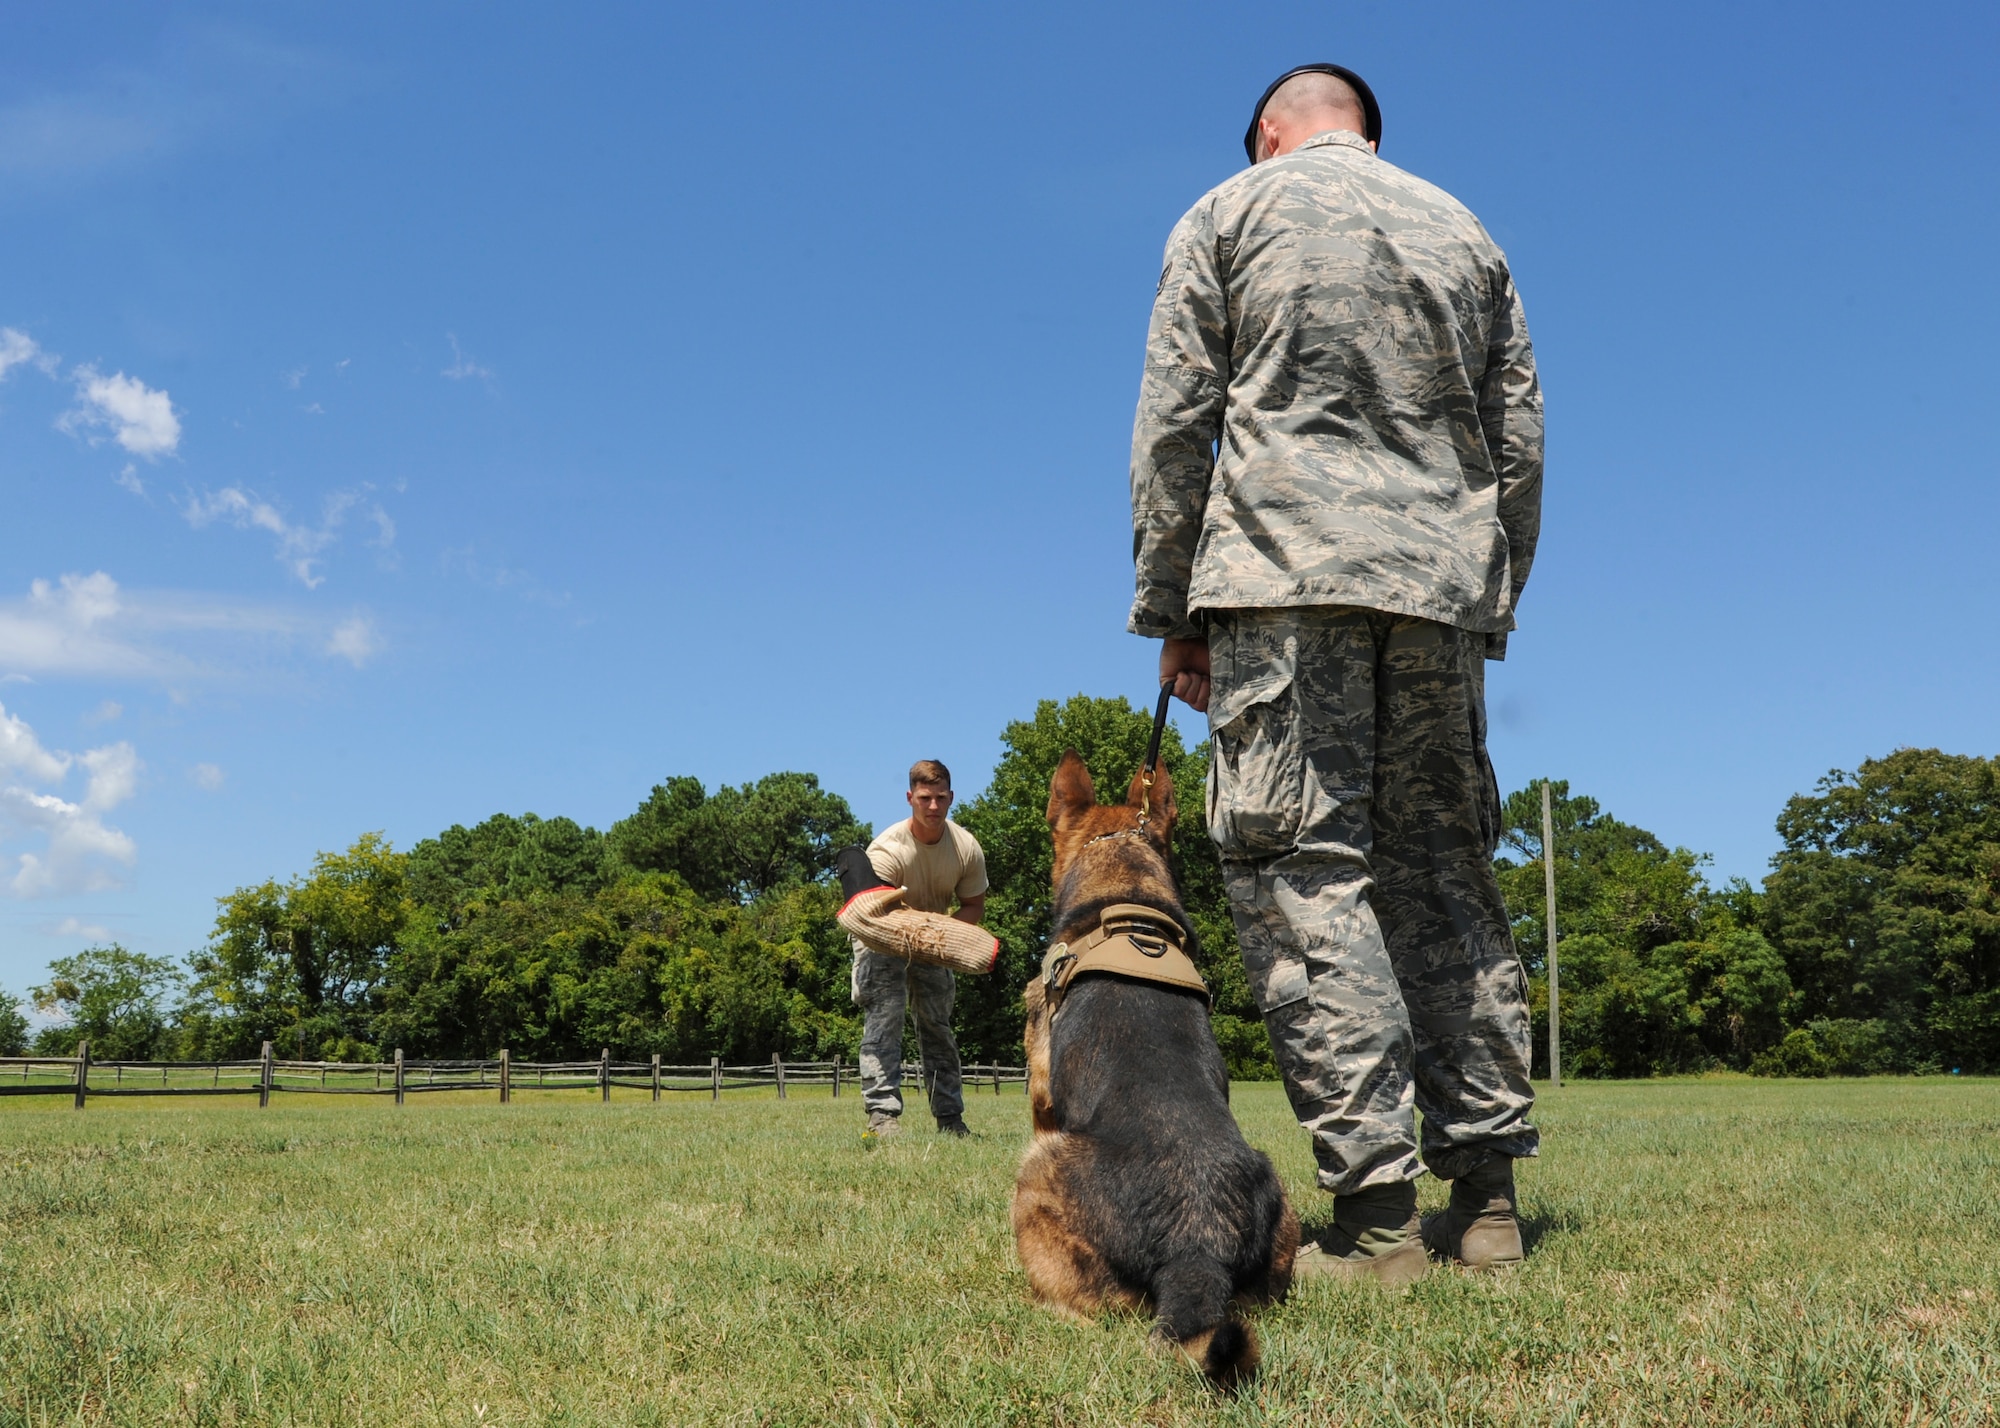 U.S. Air Force Staff Sgt. Jeffrie Kennedy, 633rd Security Forces Squadron military working dog handler prepares to instruct his partner, Toni, 633rd SFS MWD, at Joint Base Langley-Eustis, Va., Aug. 4, 2017.